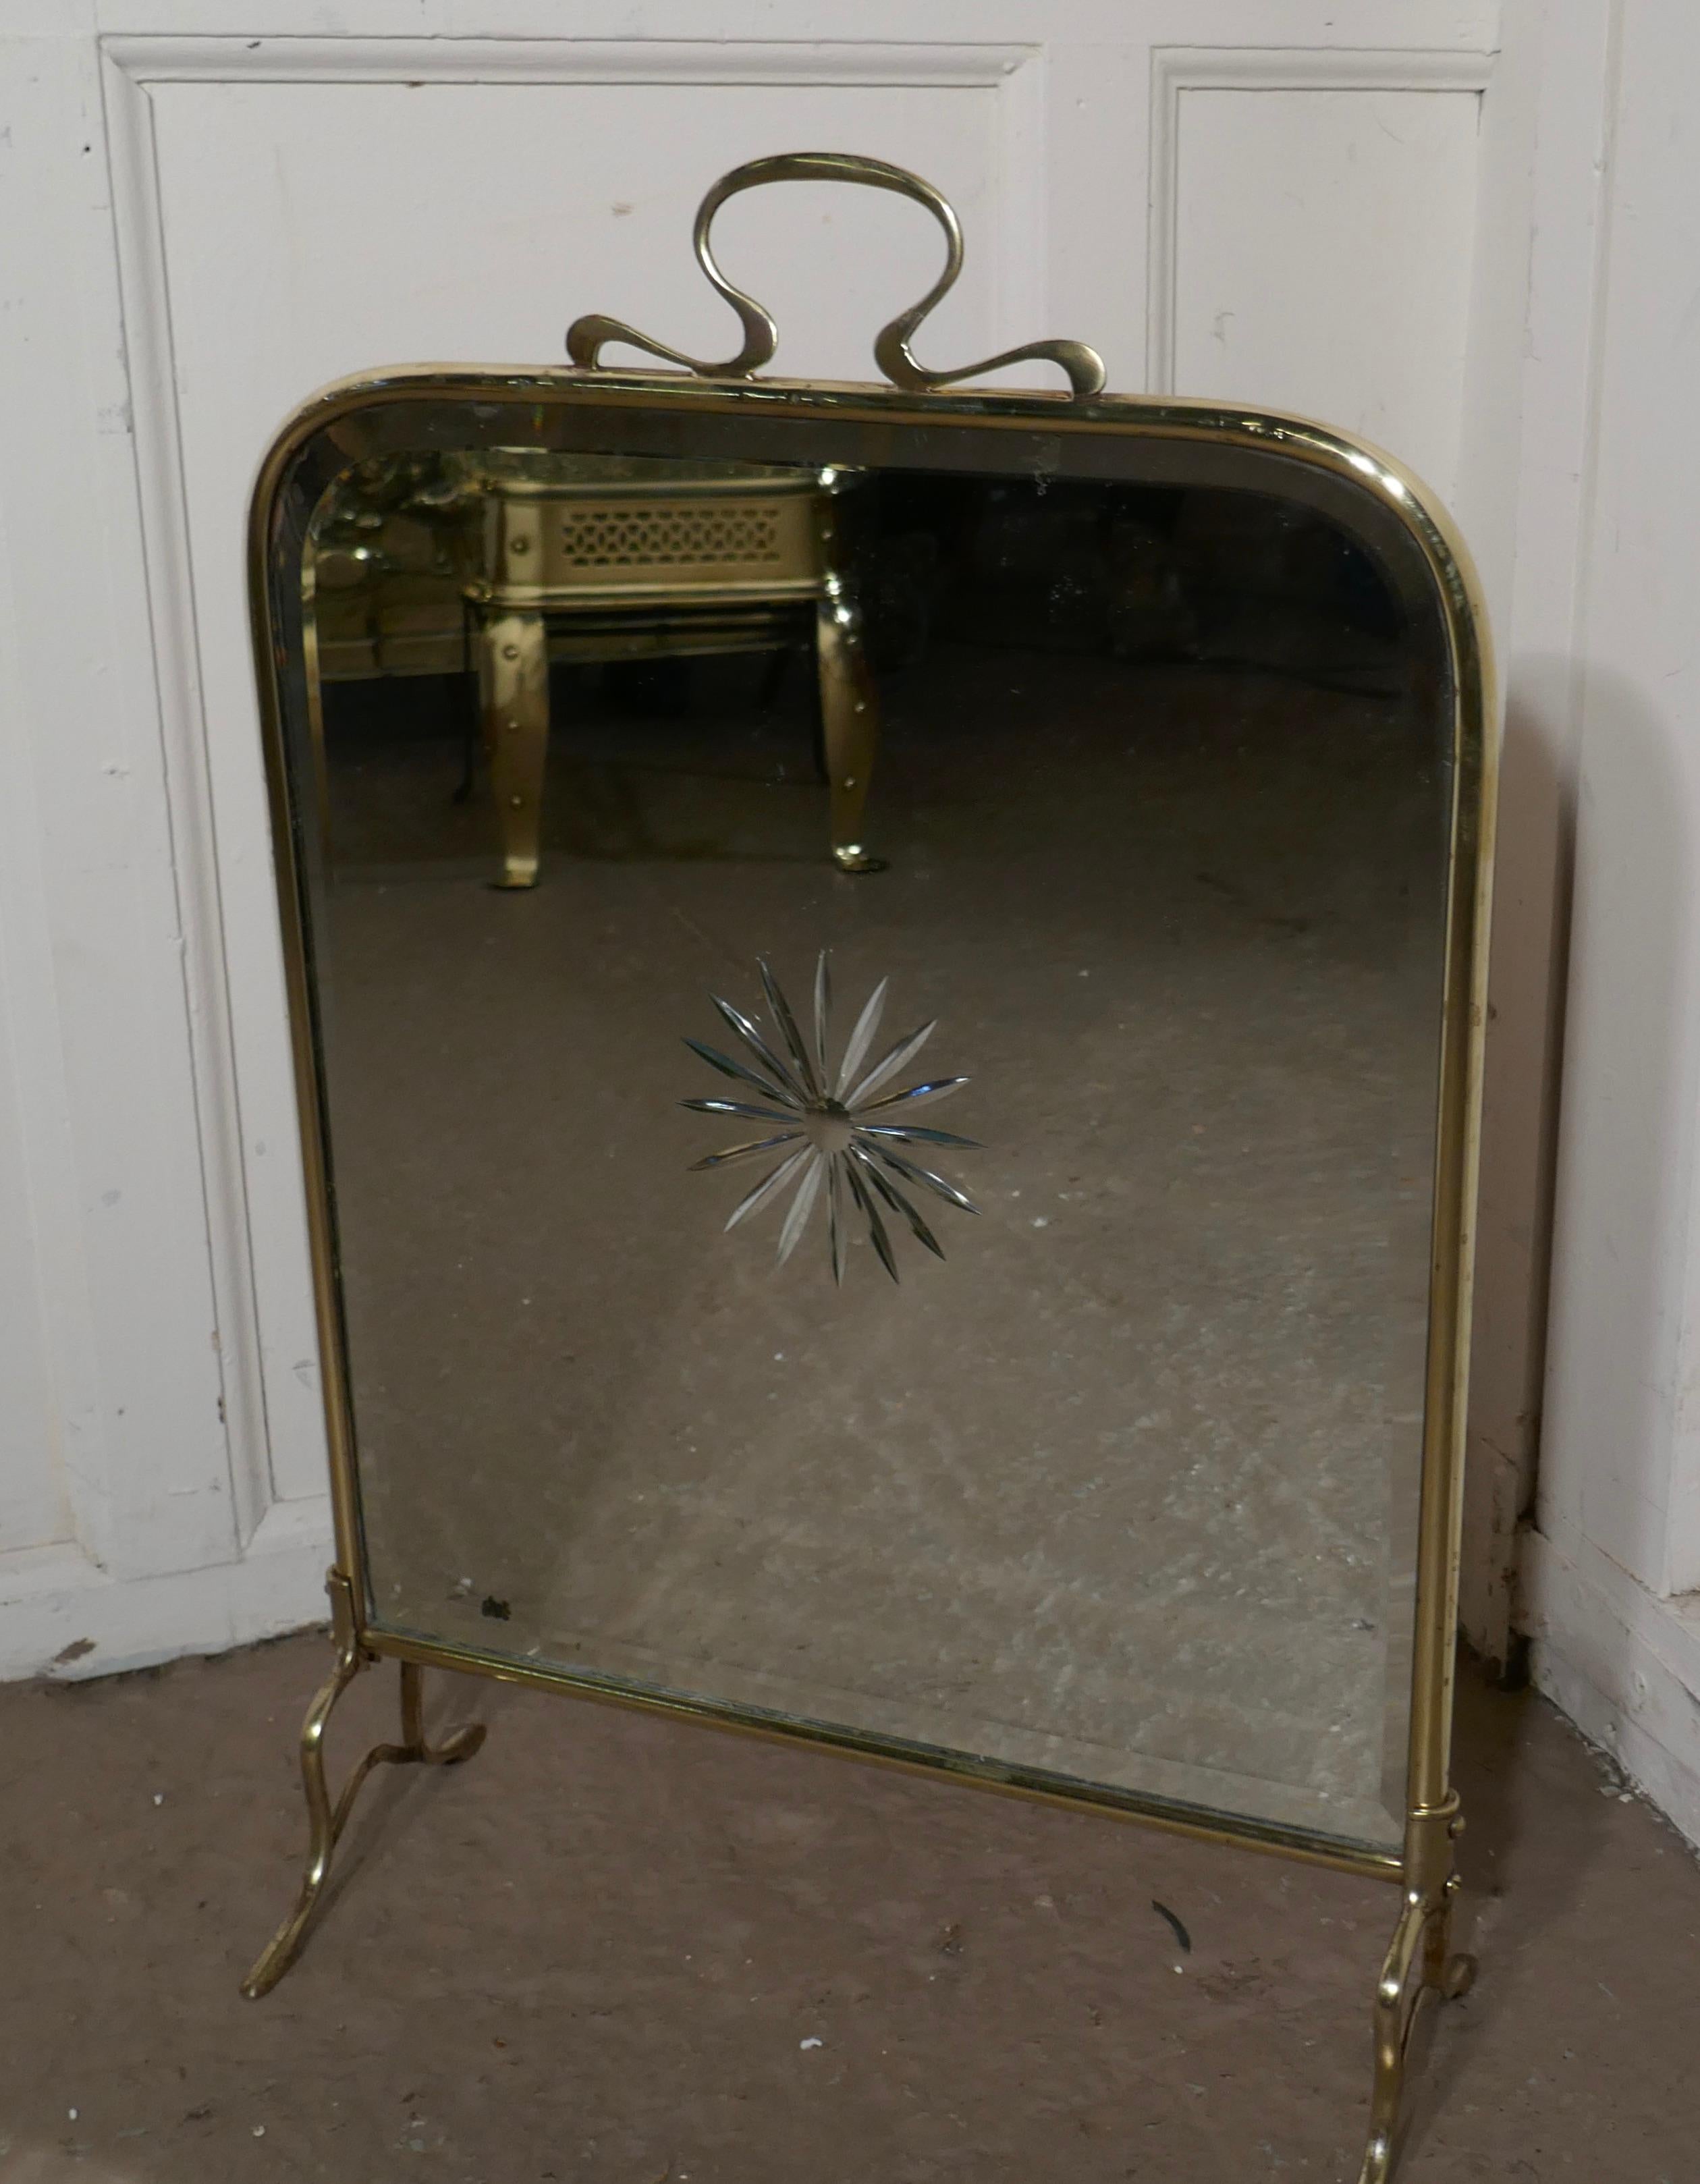 A Victorian Art Nouveau brass and sunburst mirror fire screen

This is a most decorative fire screen it has a brass frame and stand, the mirror has an etched Starburst in the centre
The screen is in good sound condition, there is very minor